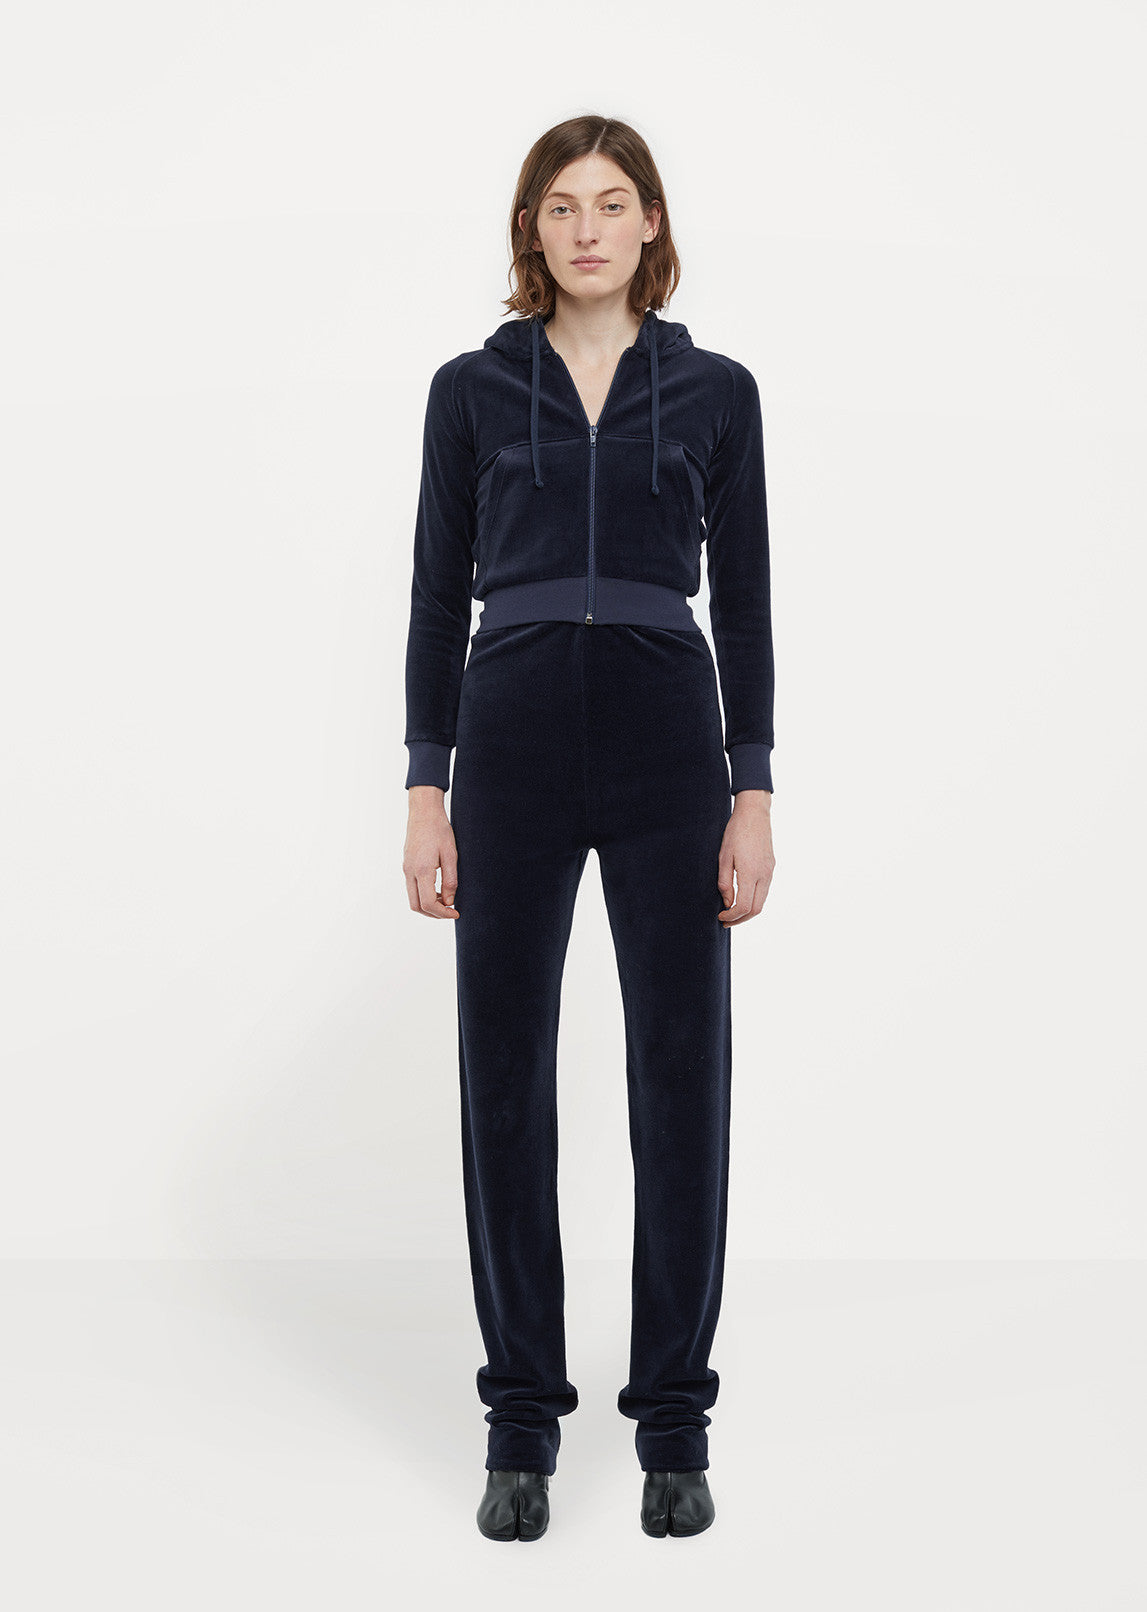 X Juicy Couture Velvet Tracksuit - Small / Navy